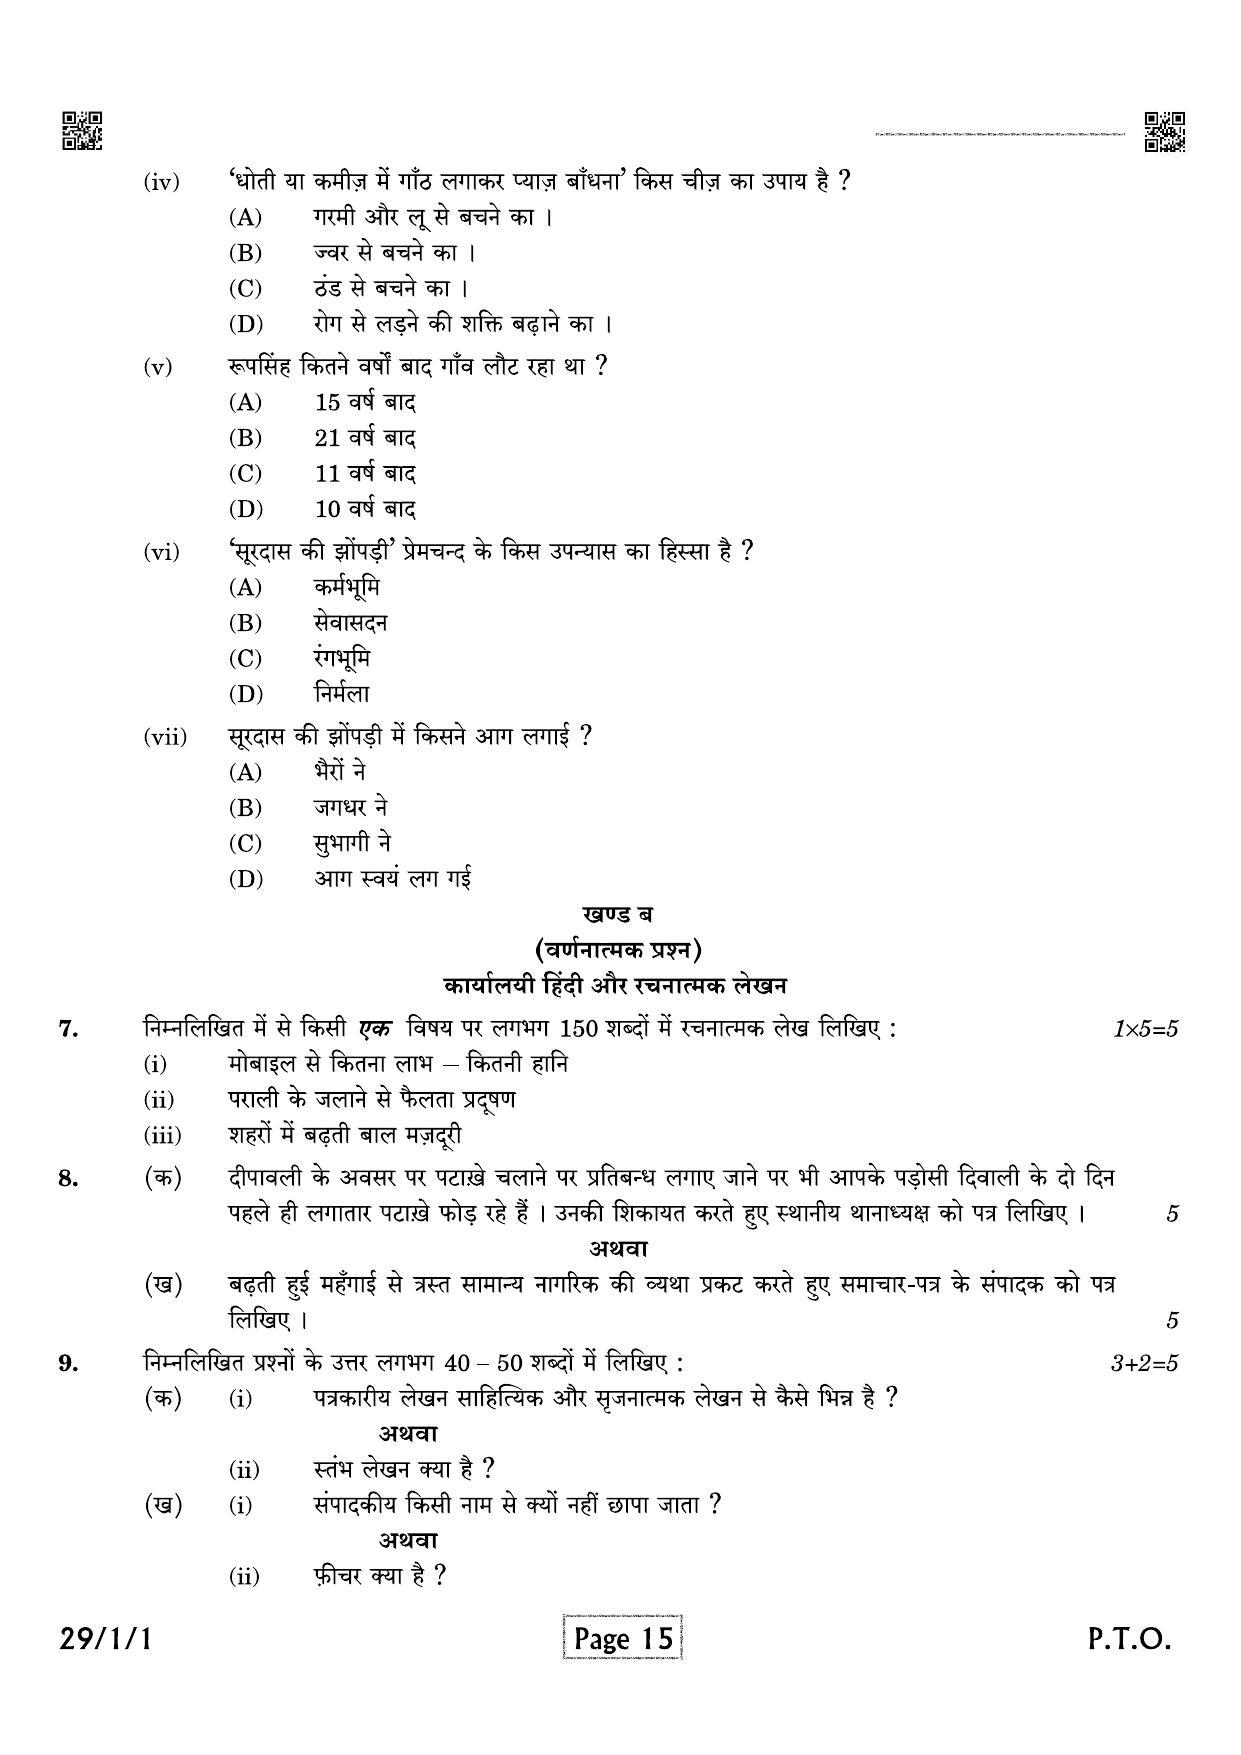 CBSE Class 12 QP_002_HINDI_ELECTIVE 2021 Compartment Question Paper - Page 15